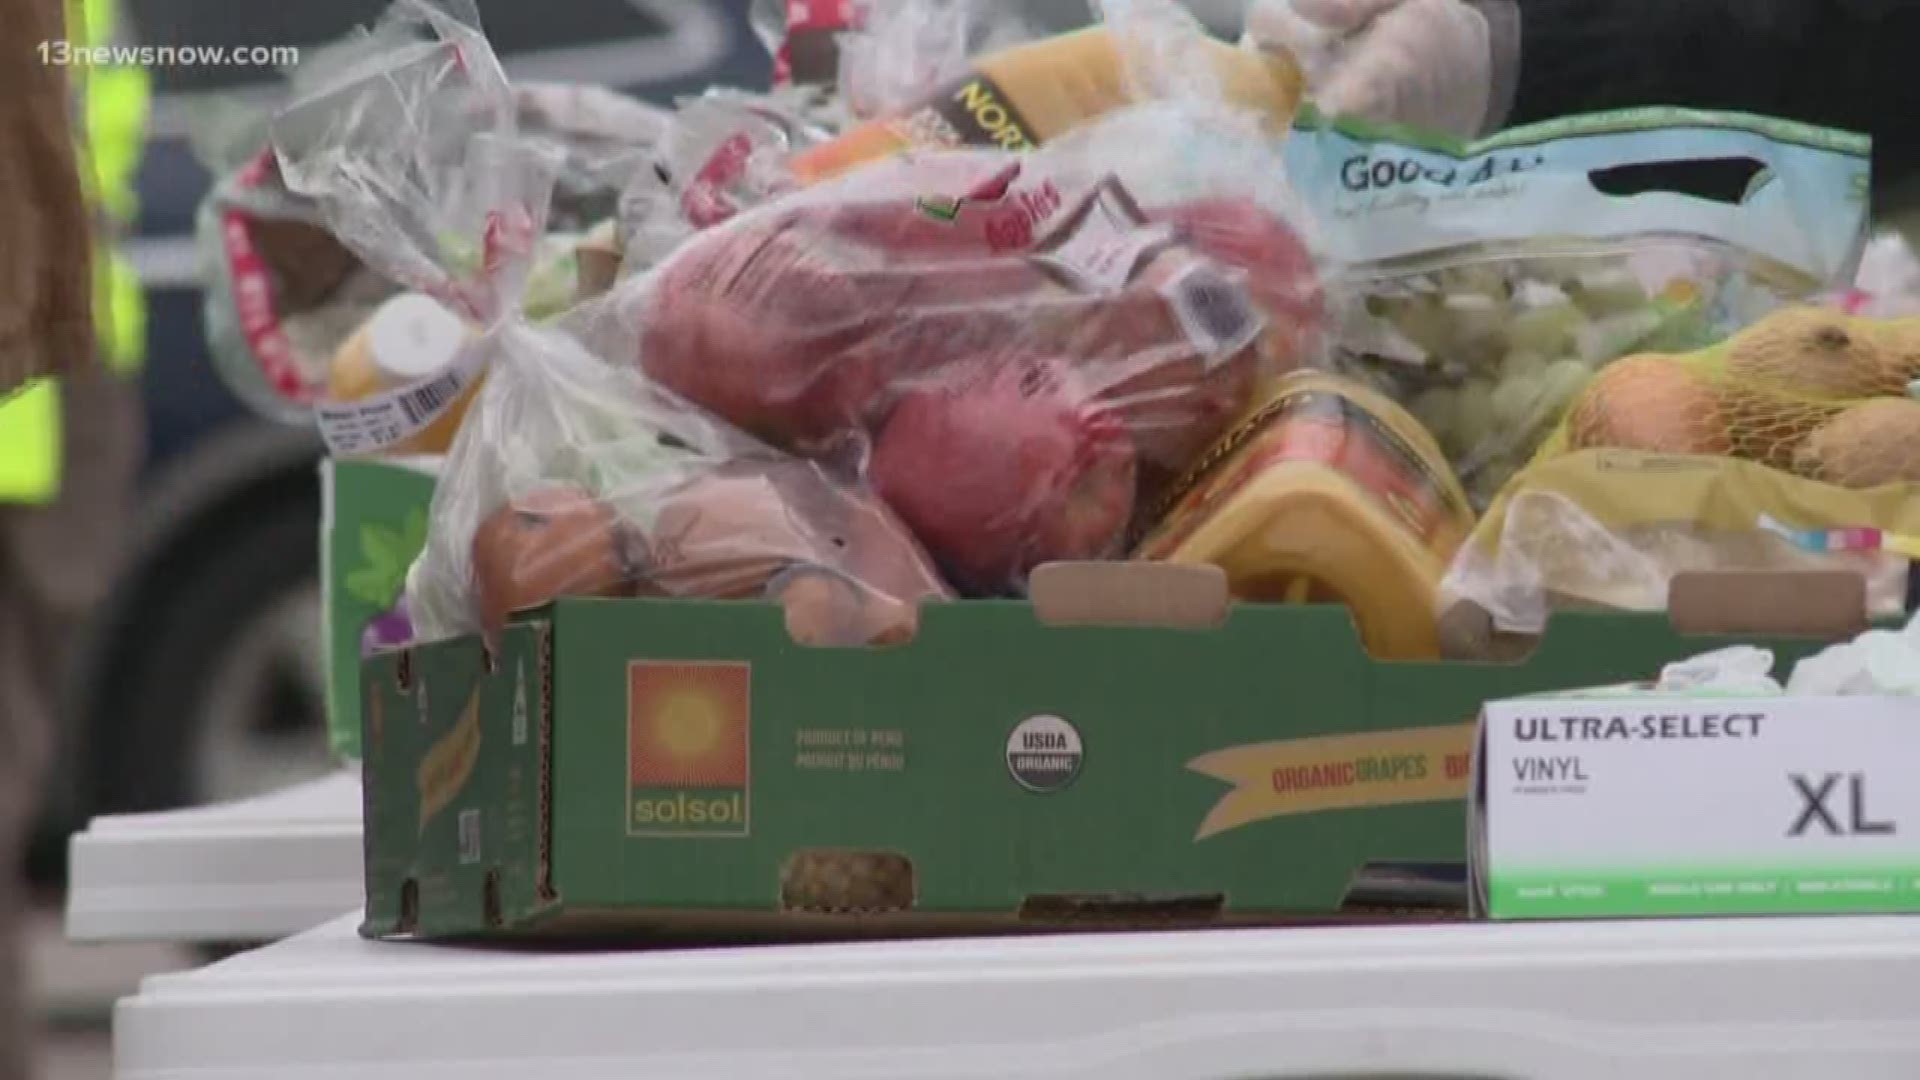 The Virginia Peninsula Food Bank is trying to help alleviate coronavirus-related food insecurity. It fed hundreds on April 1 with its Todds Stadium drive-thru.